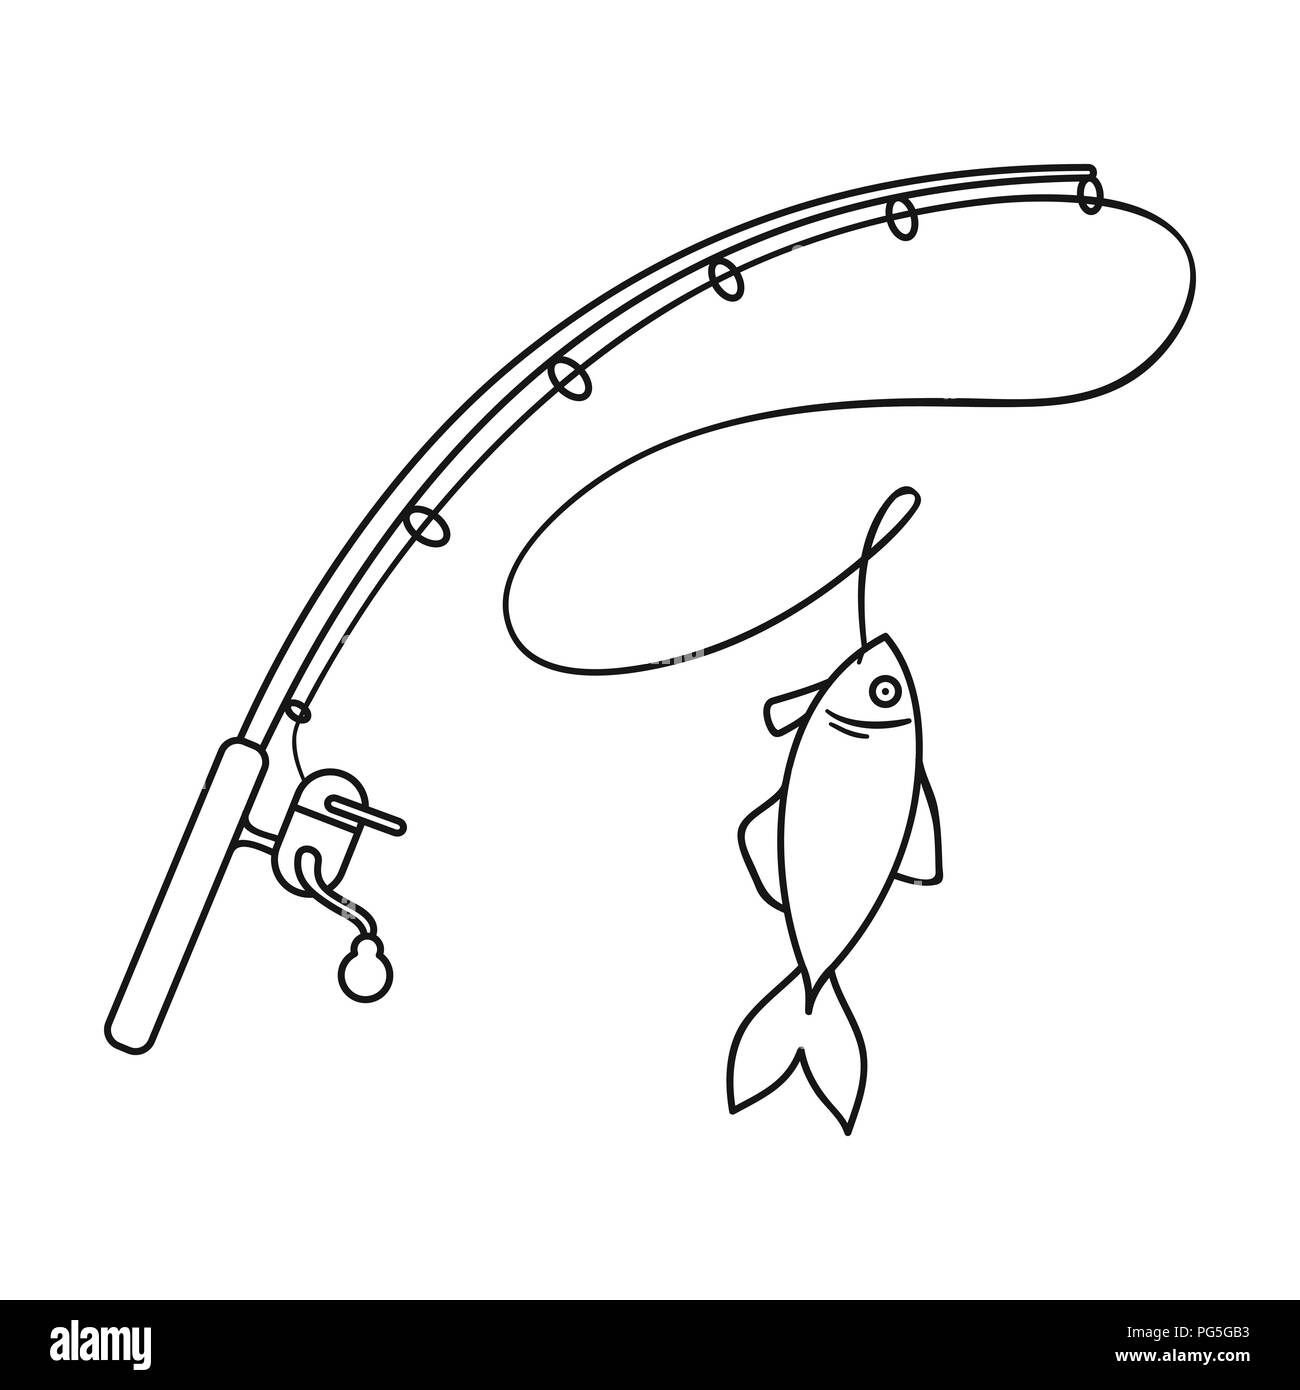 Fishing rod and fish icon in outline design isolated on white